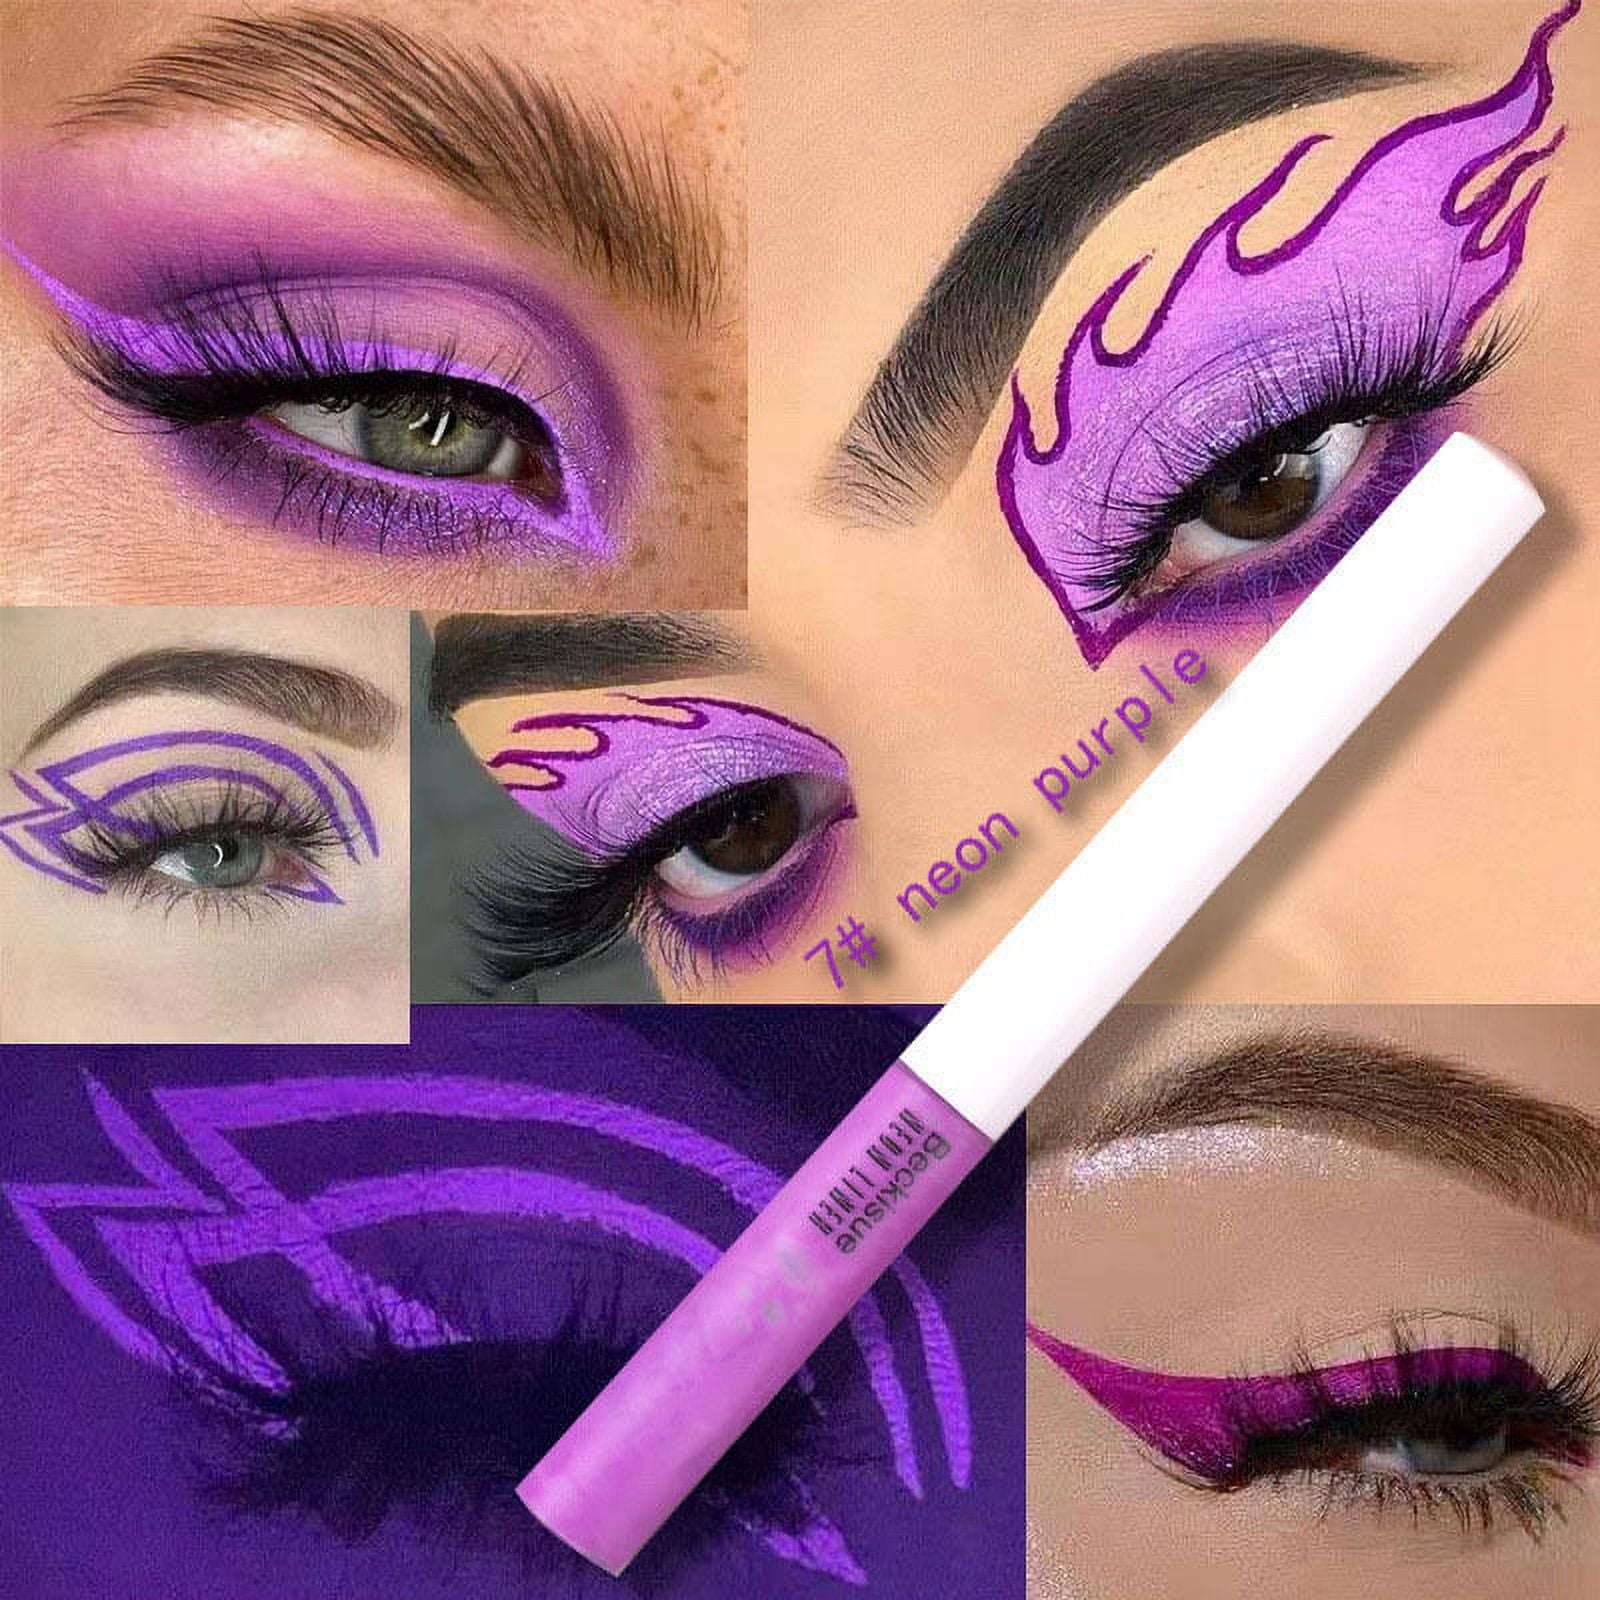 HANDAIYAN Water Activated Black Light Purple Eyeliner For Body And Face  Neon Pastels For Glow In The Dark Eye Liner From Fashion_show2017, $2.57